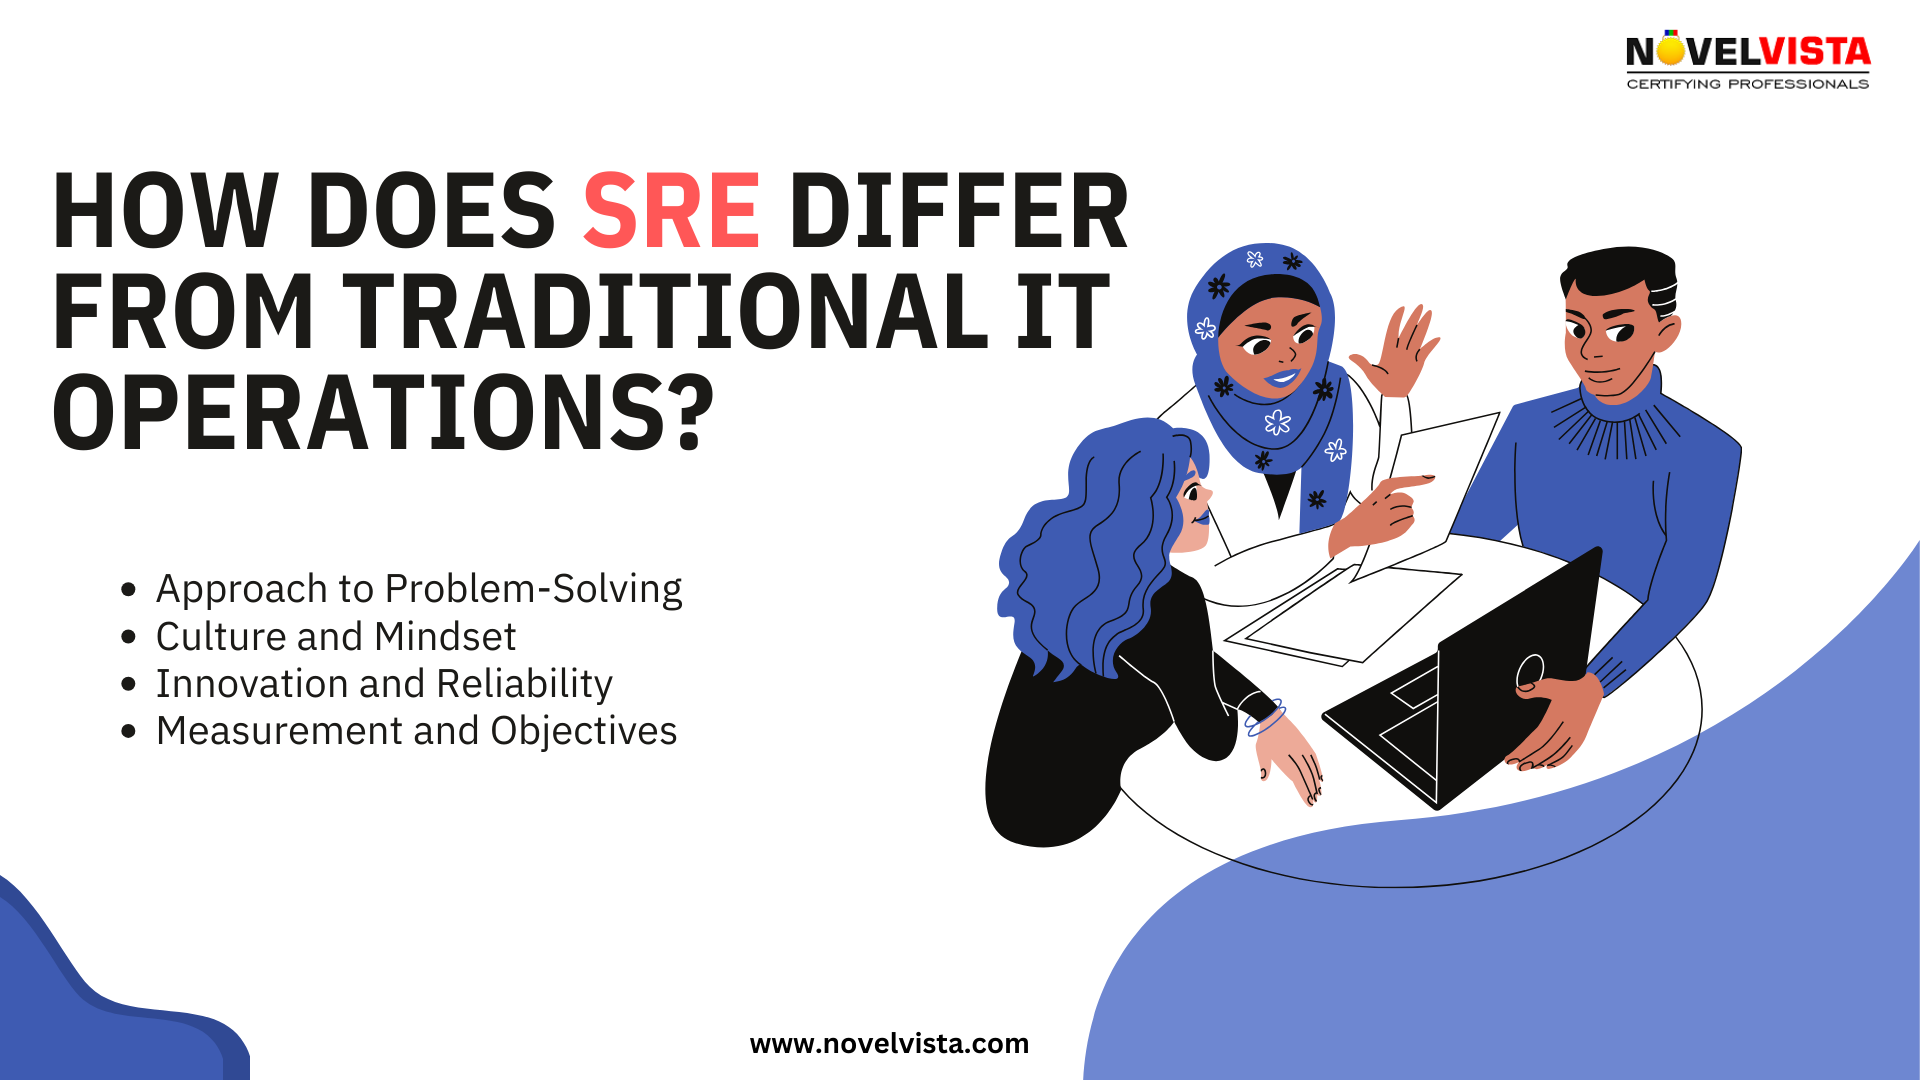 SRE Differ from Traditional IT Operations